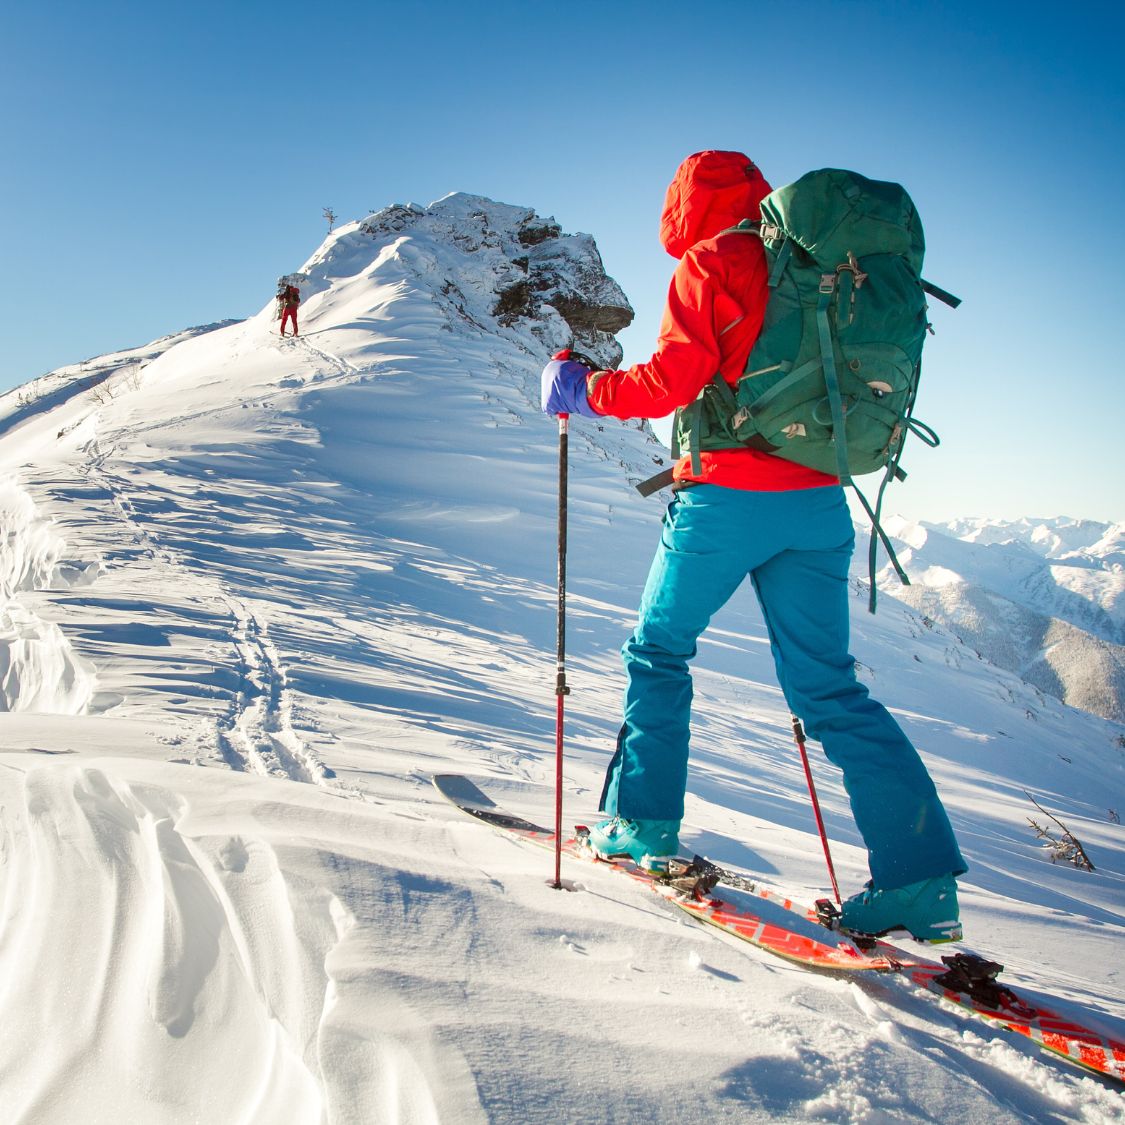 Expert Tips for Staying Warm on Your First Ski Trip